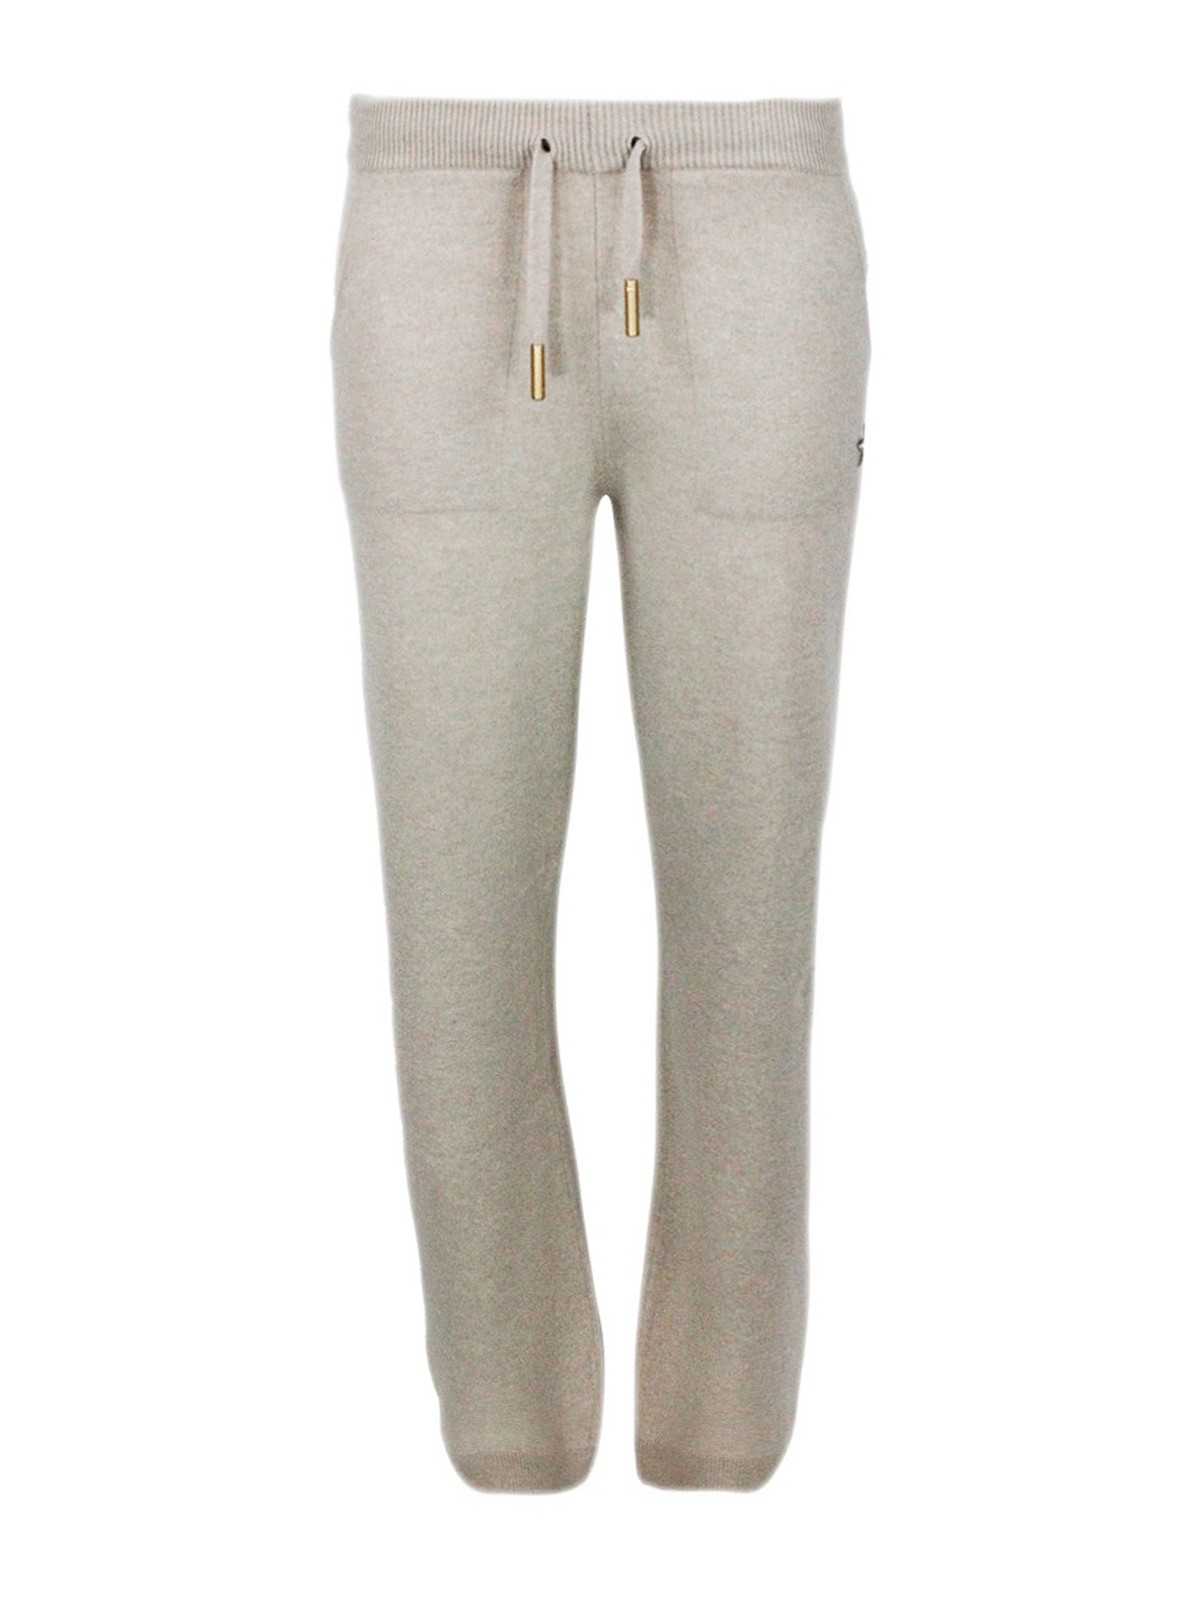 Casual trousers Lorena Antoniazzi - Knitted wool joggers style pants -  A22102PM02F24722000